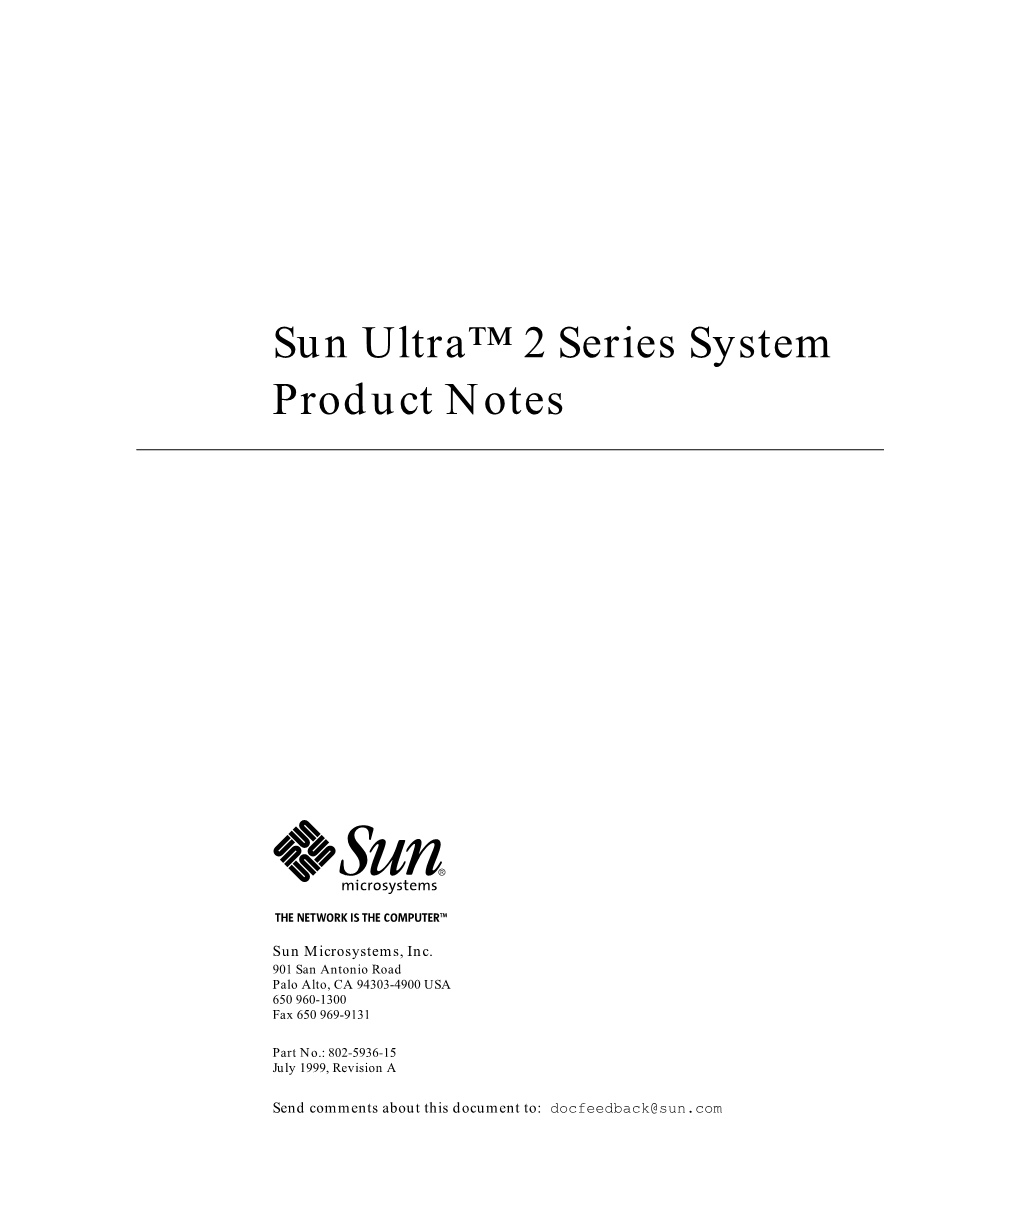 Sun Ultra 2 Series System Product Notes